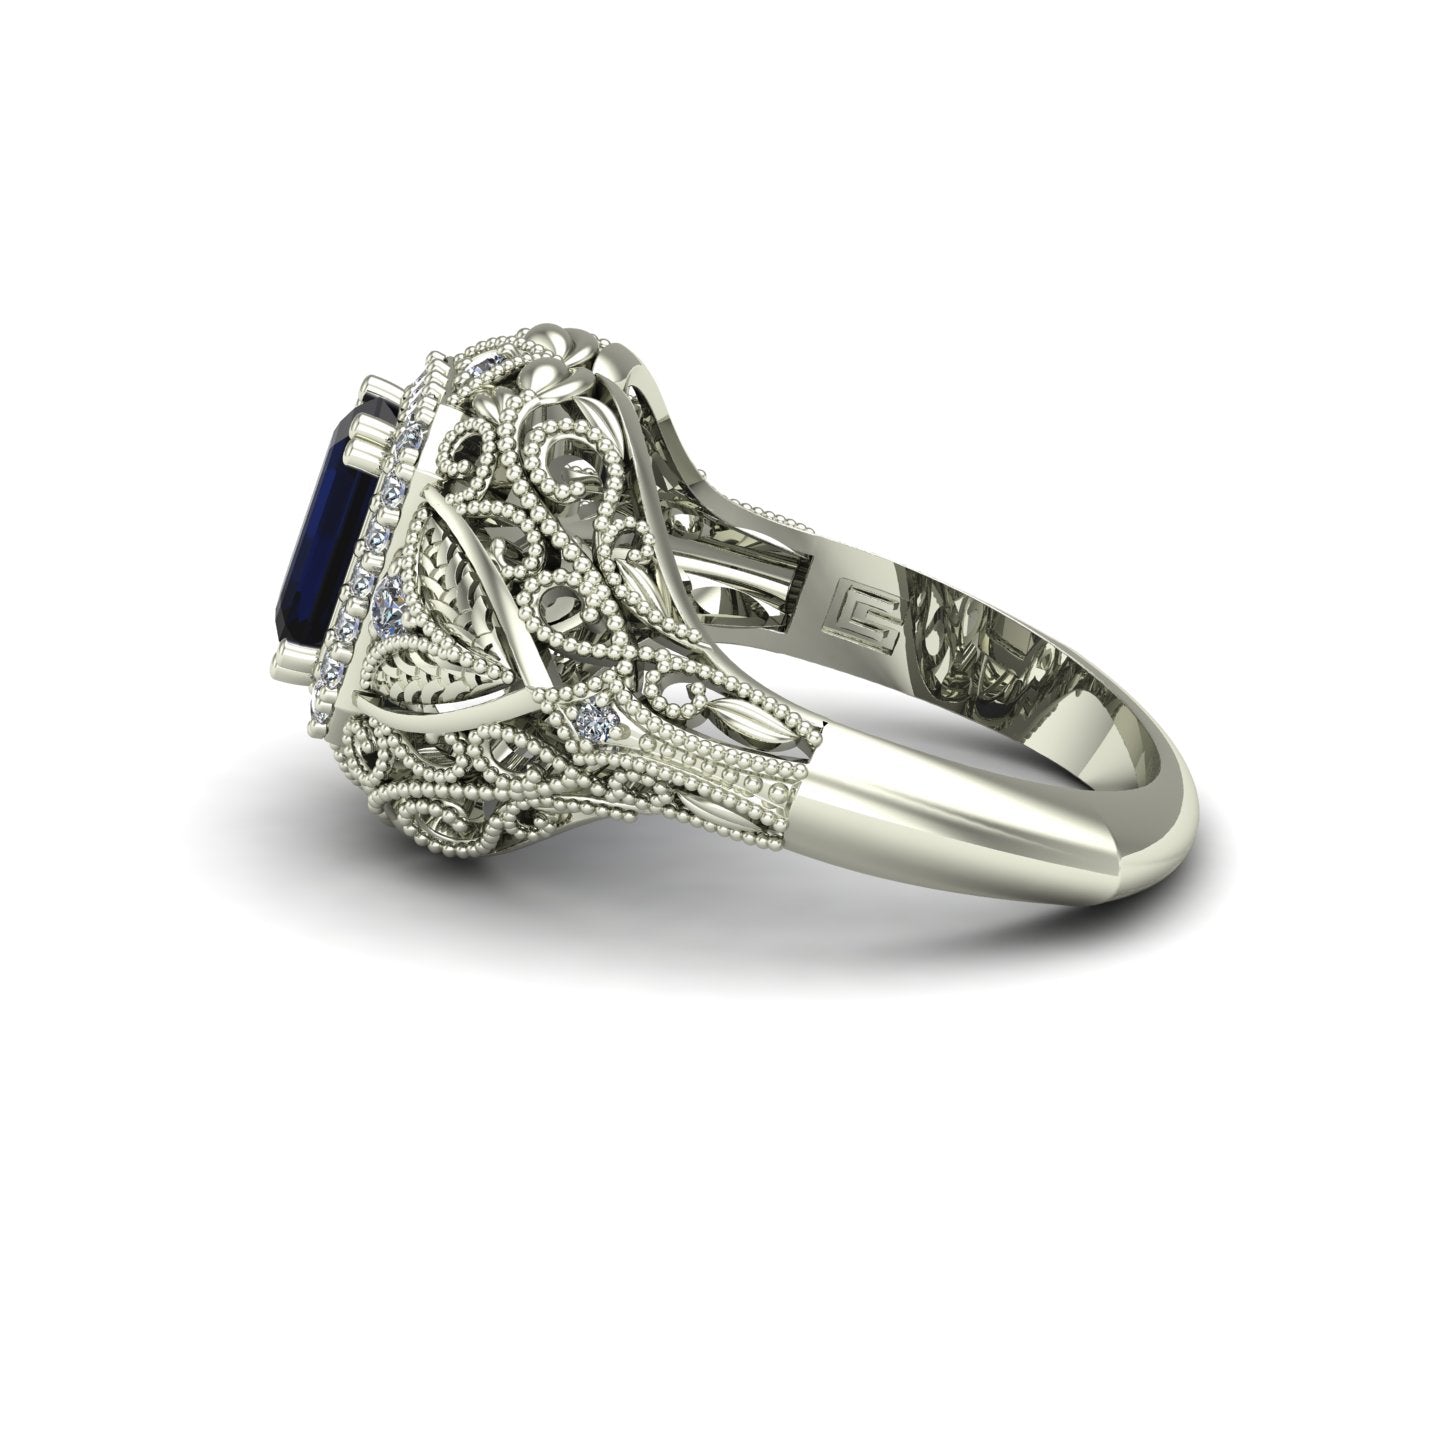 emerald cut blue sapphire and diamond ring with leaves in 14k white gold - Charles Babb Designs - side view